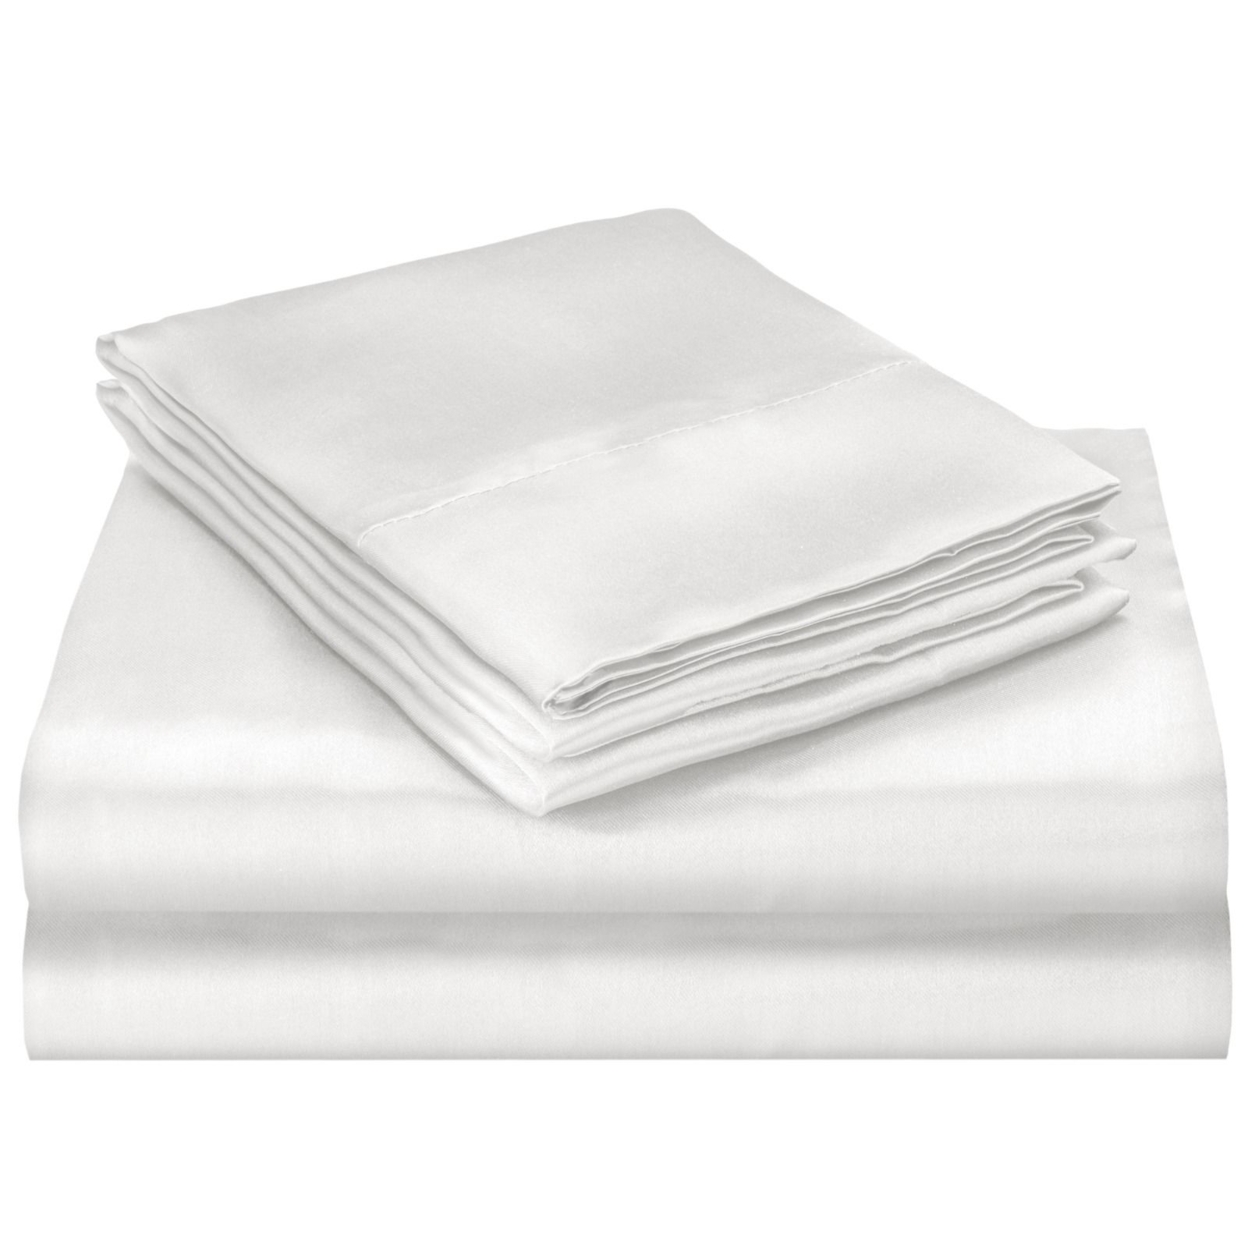 Queen Size Satin Bed Sheet Set - White